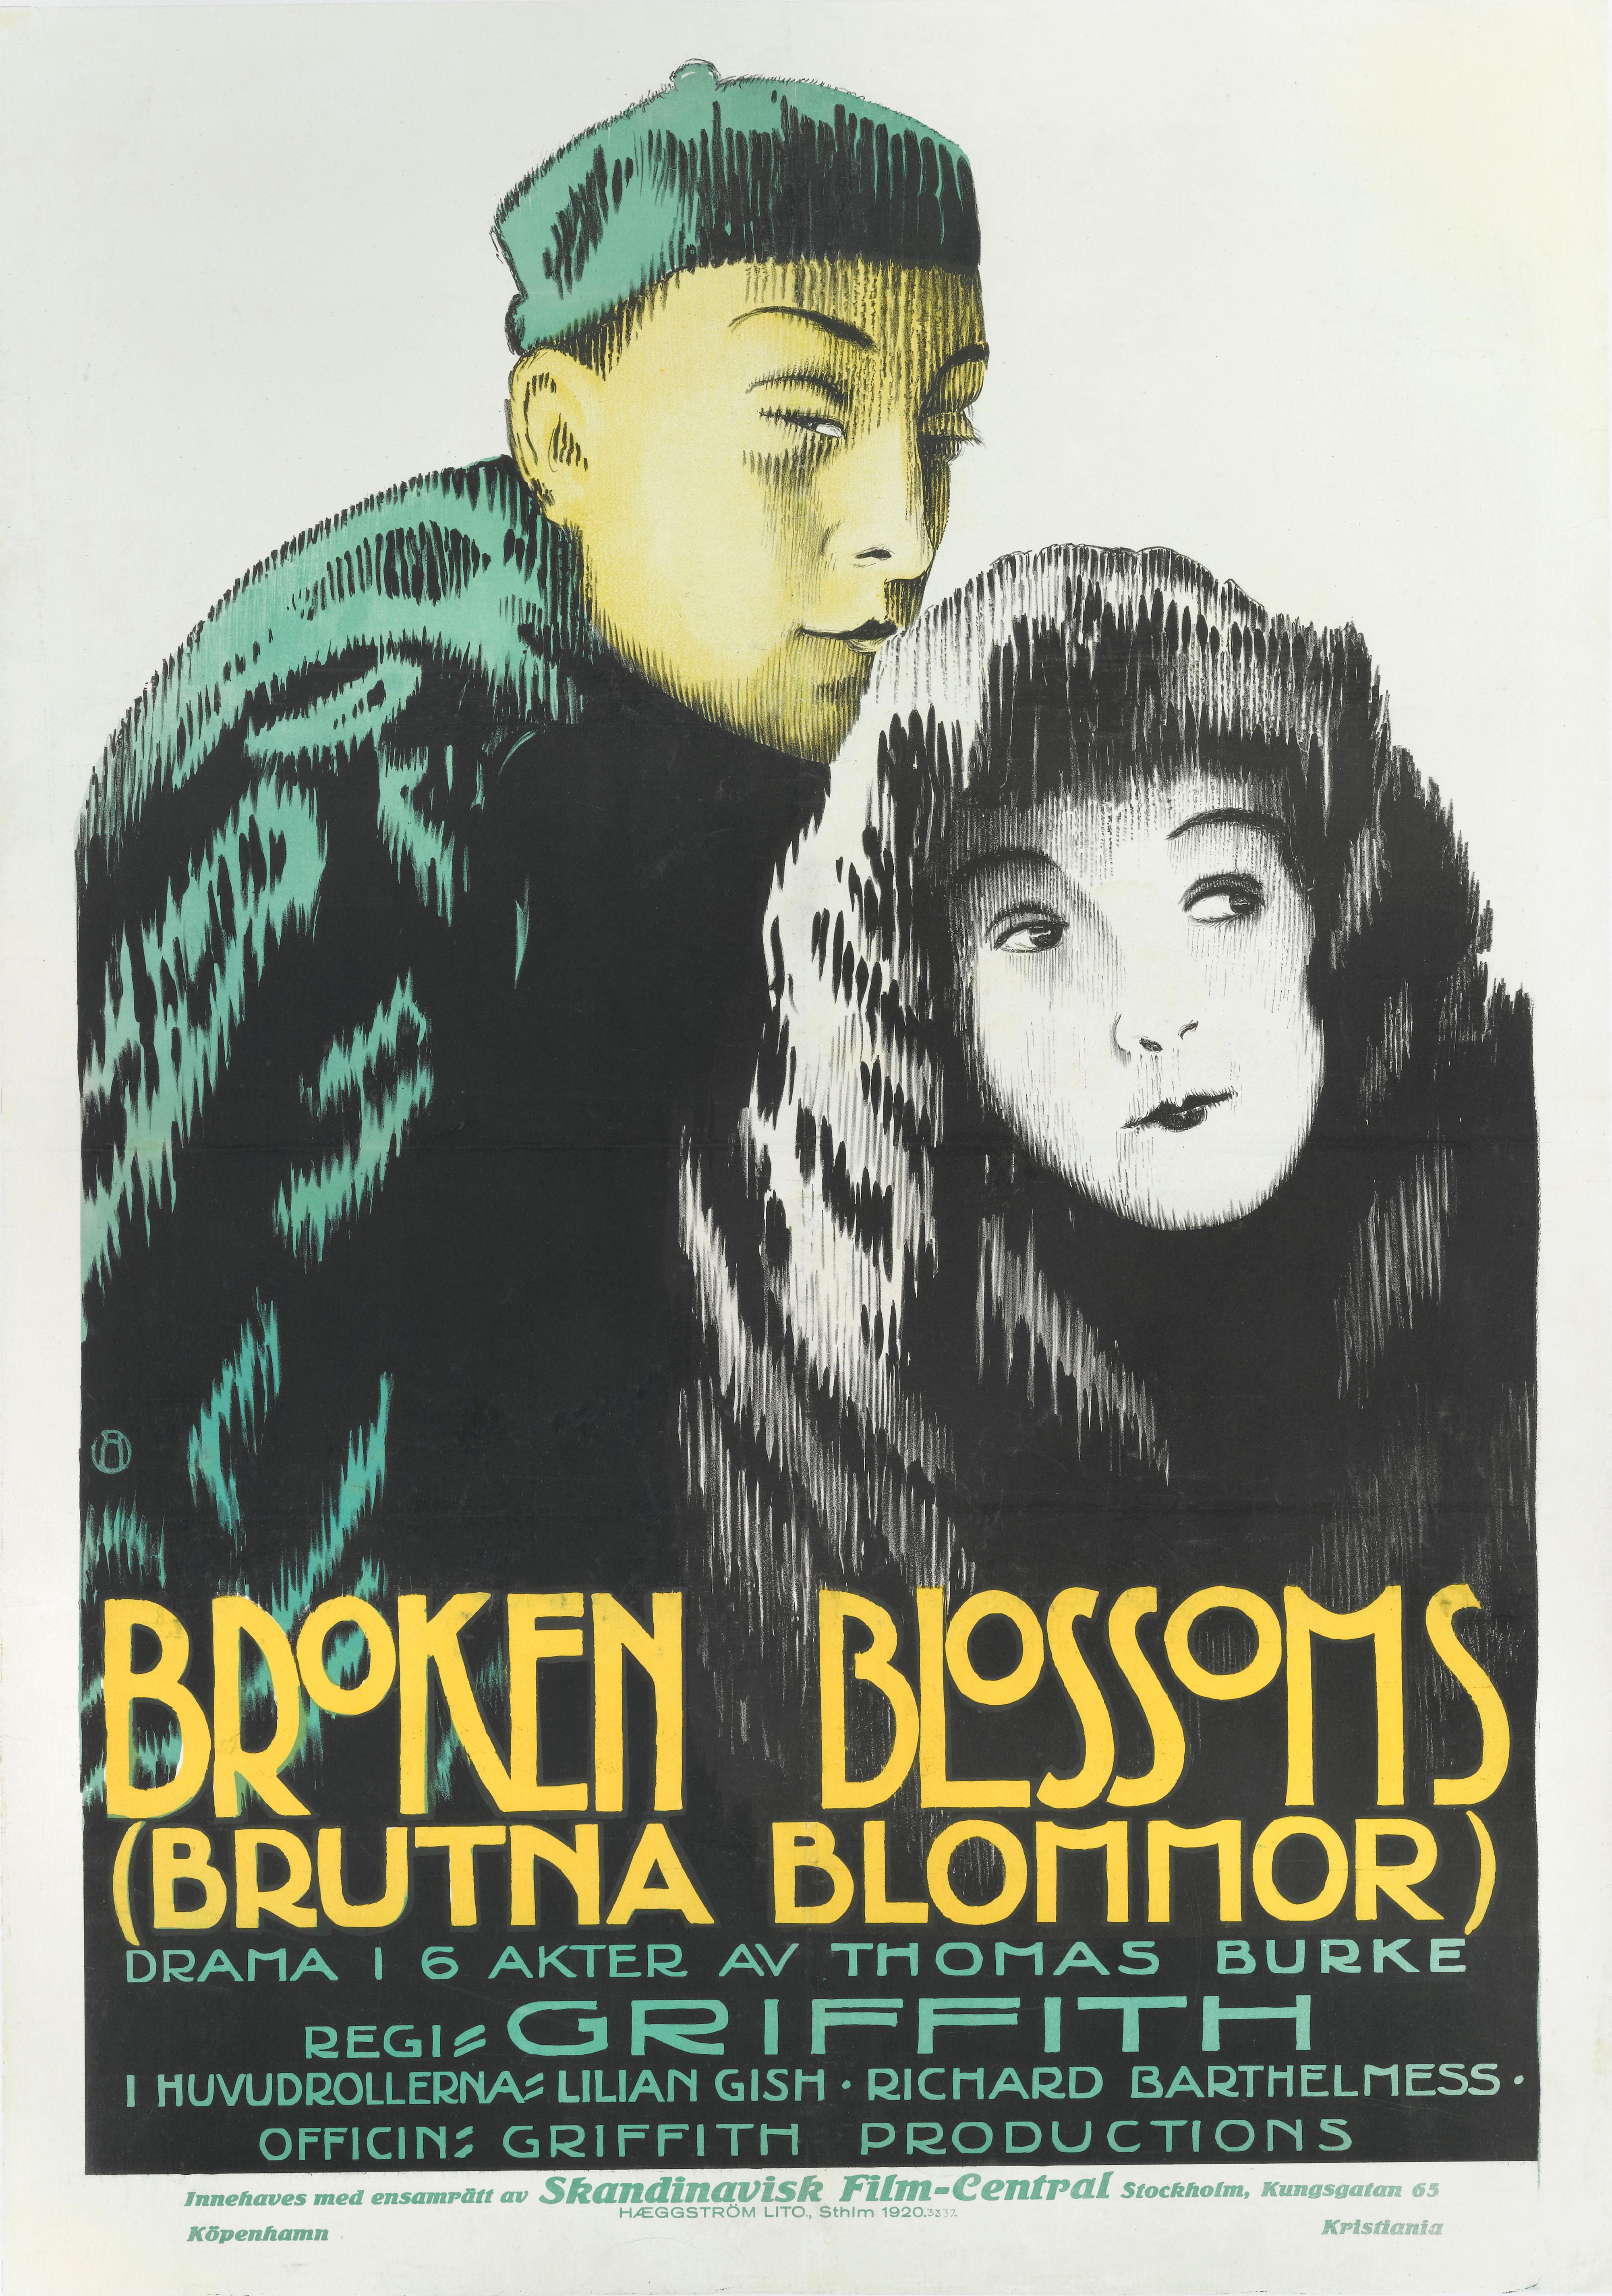 Original 1920 Swedish film poster.
The film received it's first Swedish release 1920 Broken Blossoms was released in the Us in 1919 and celebrates its 100 year anniversary this year. This silent film was directed by D.W. Griffith, one of 20th